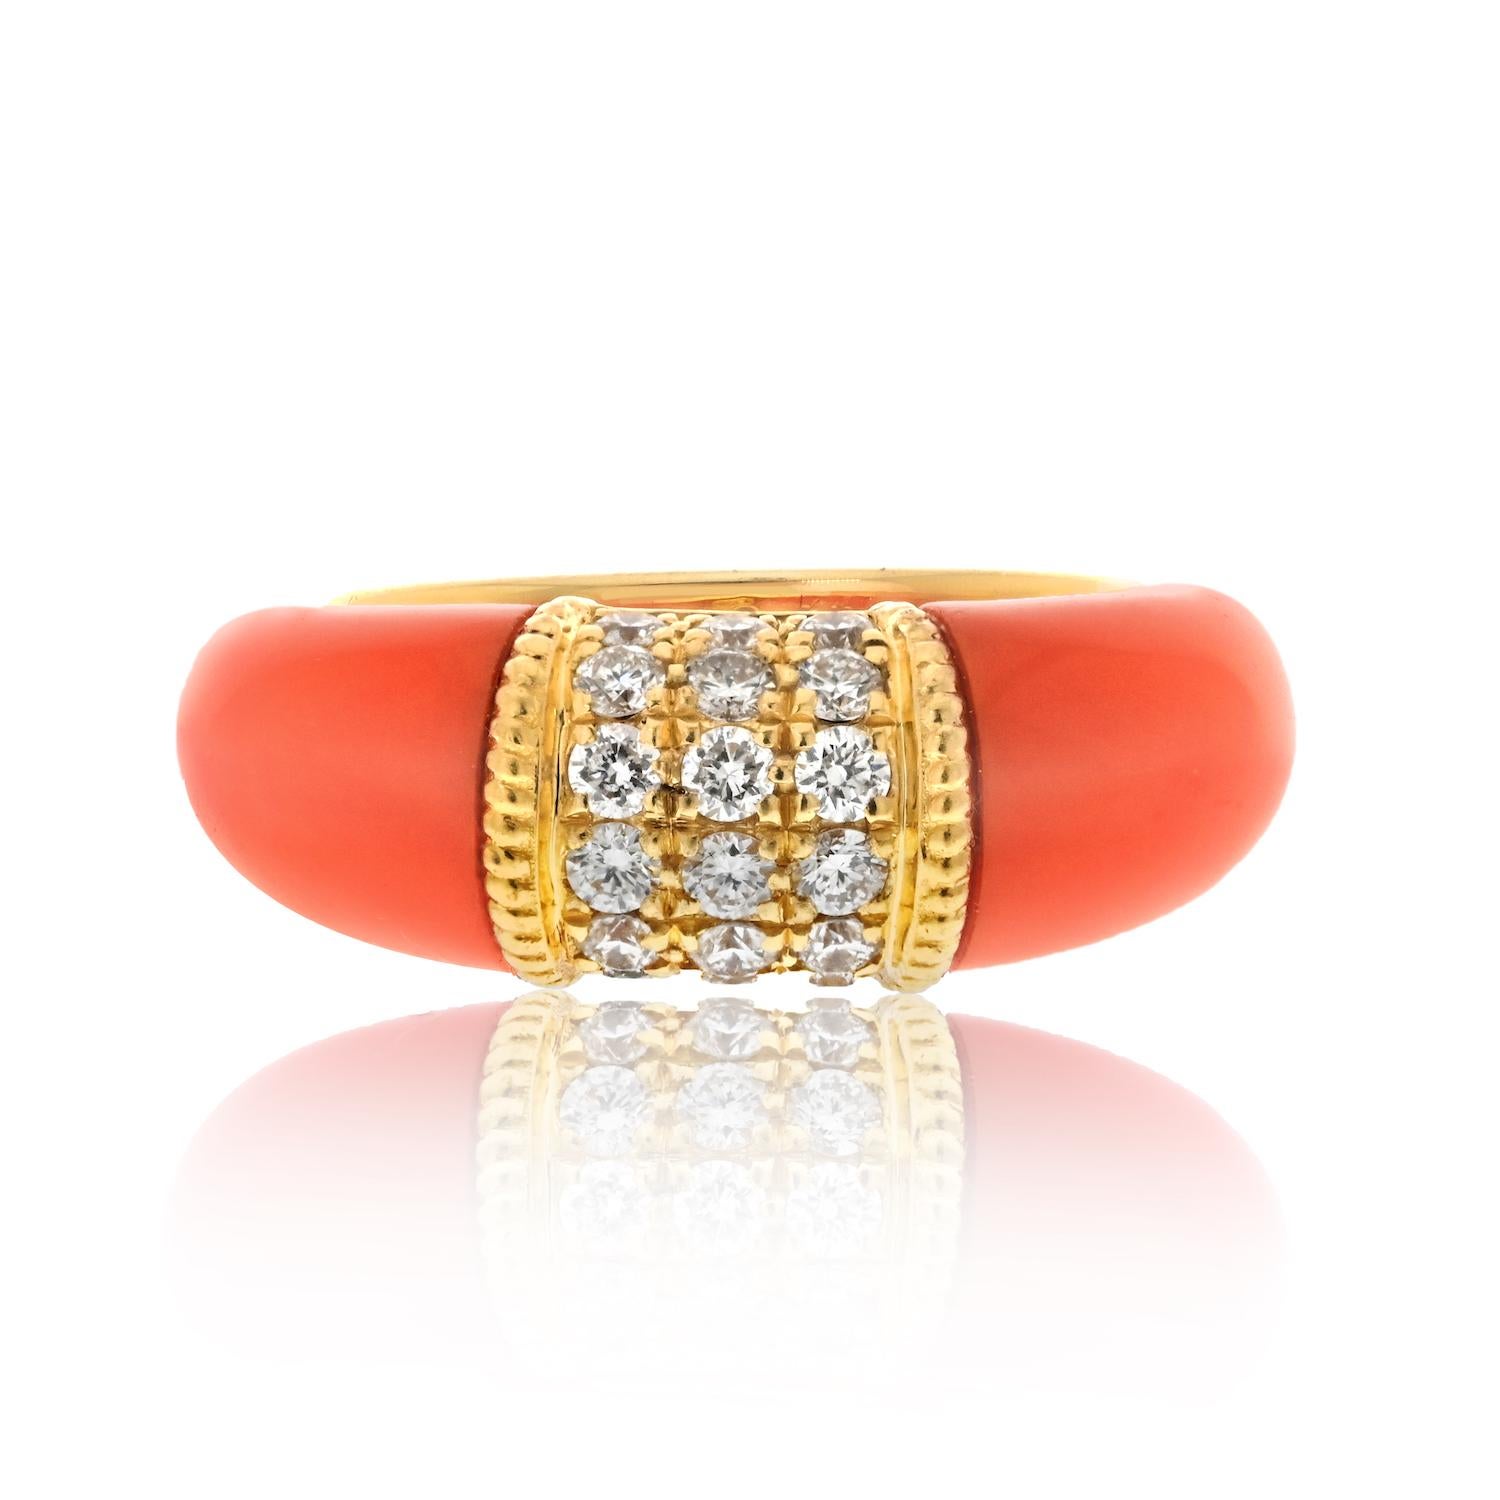 The Van Cleef & Arpels Philippine Yellow Gold Ring is a true embodiment of elegance and sophistication. Crafted with meticulous attention to detail, this ring captures the essence of timeless luxury.

Made from exquisite yellow gold, the ring